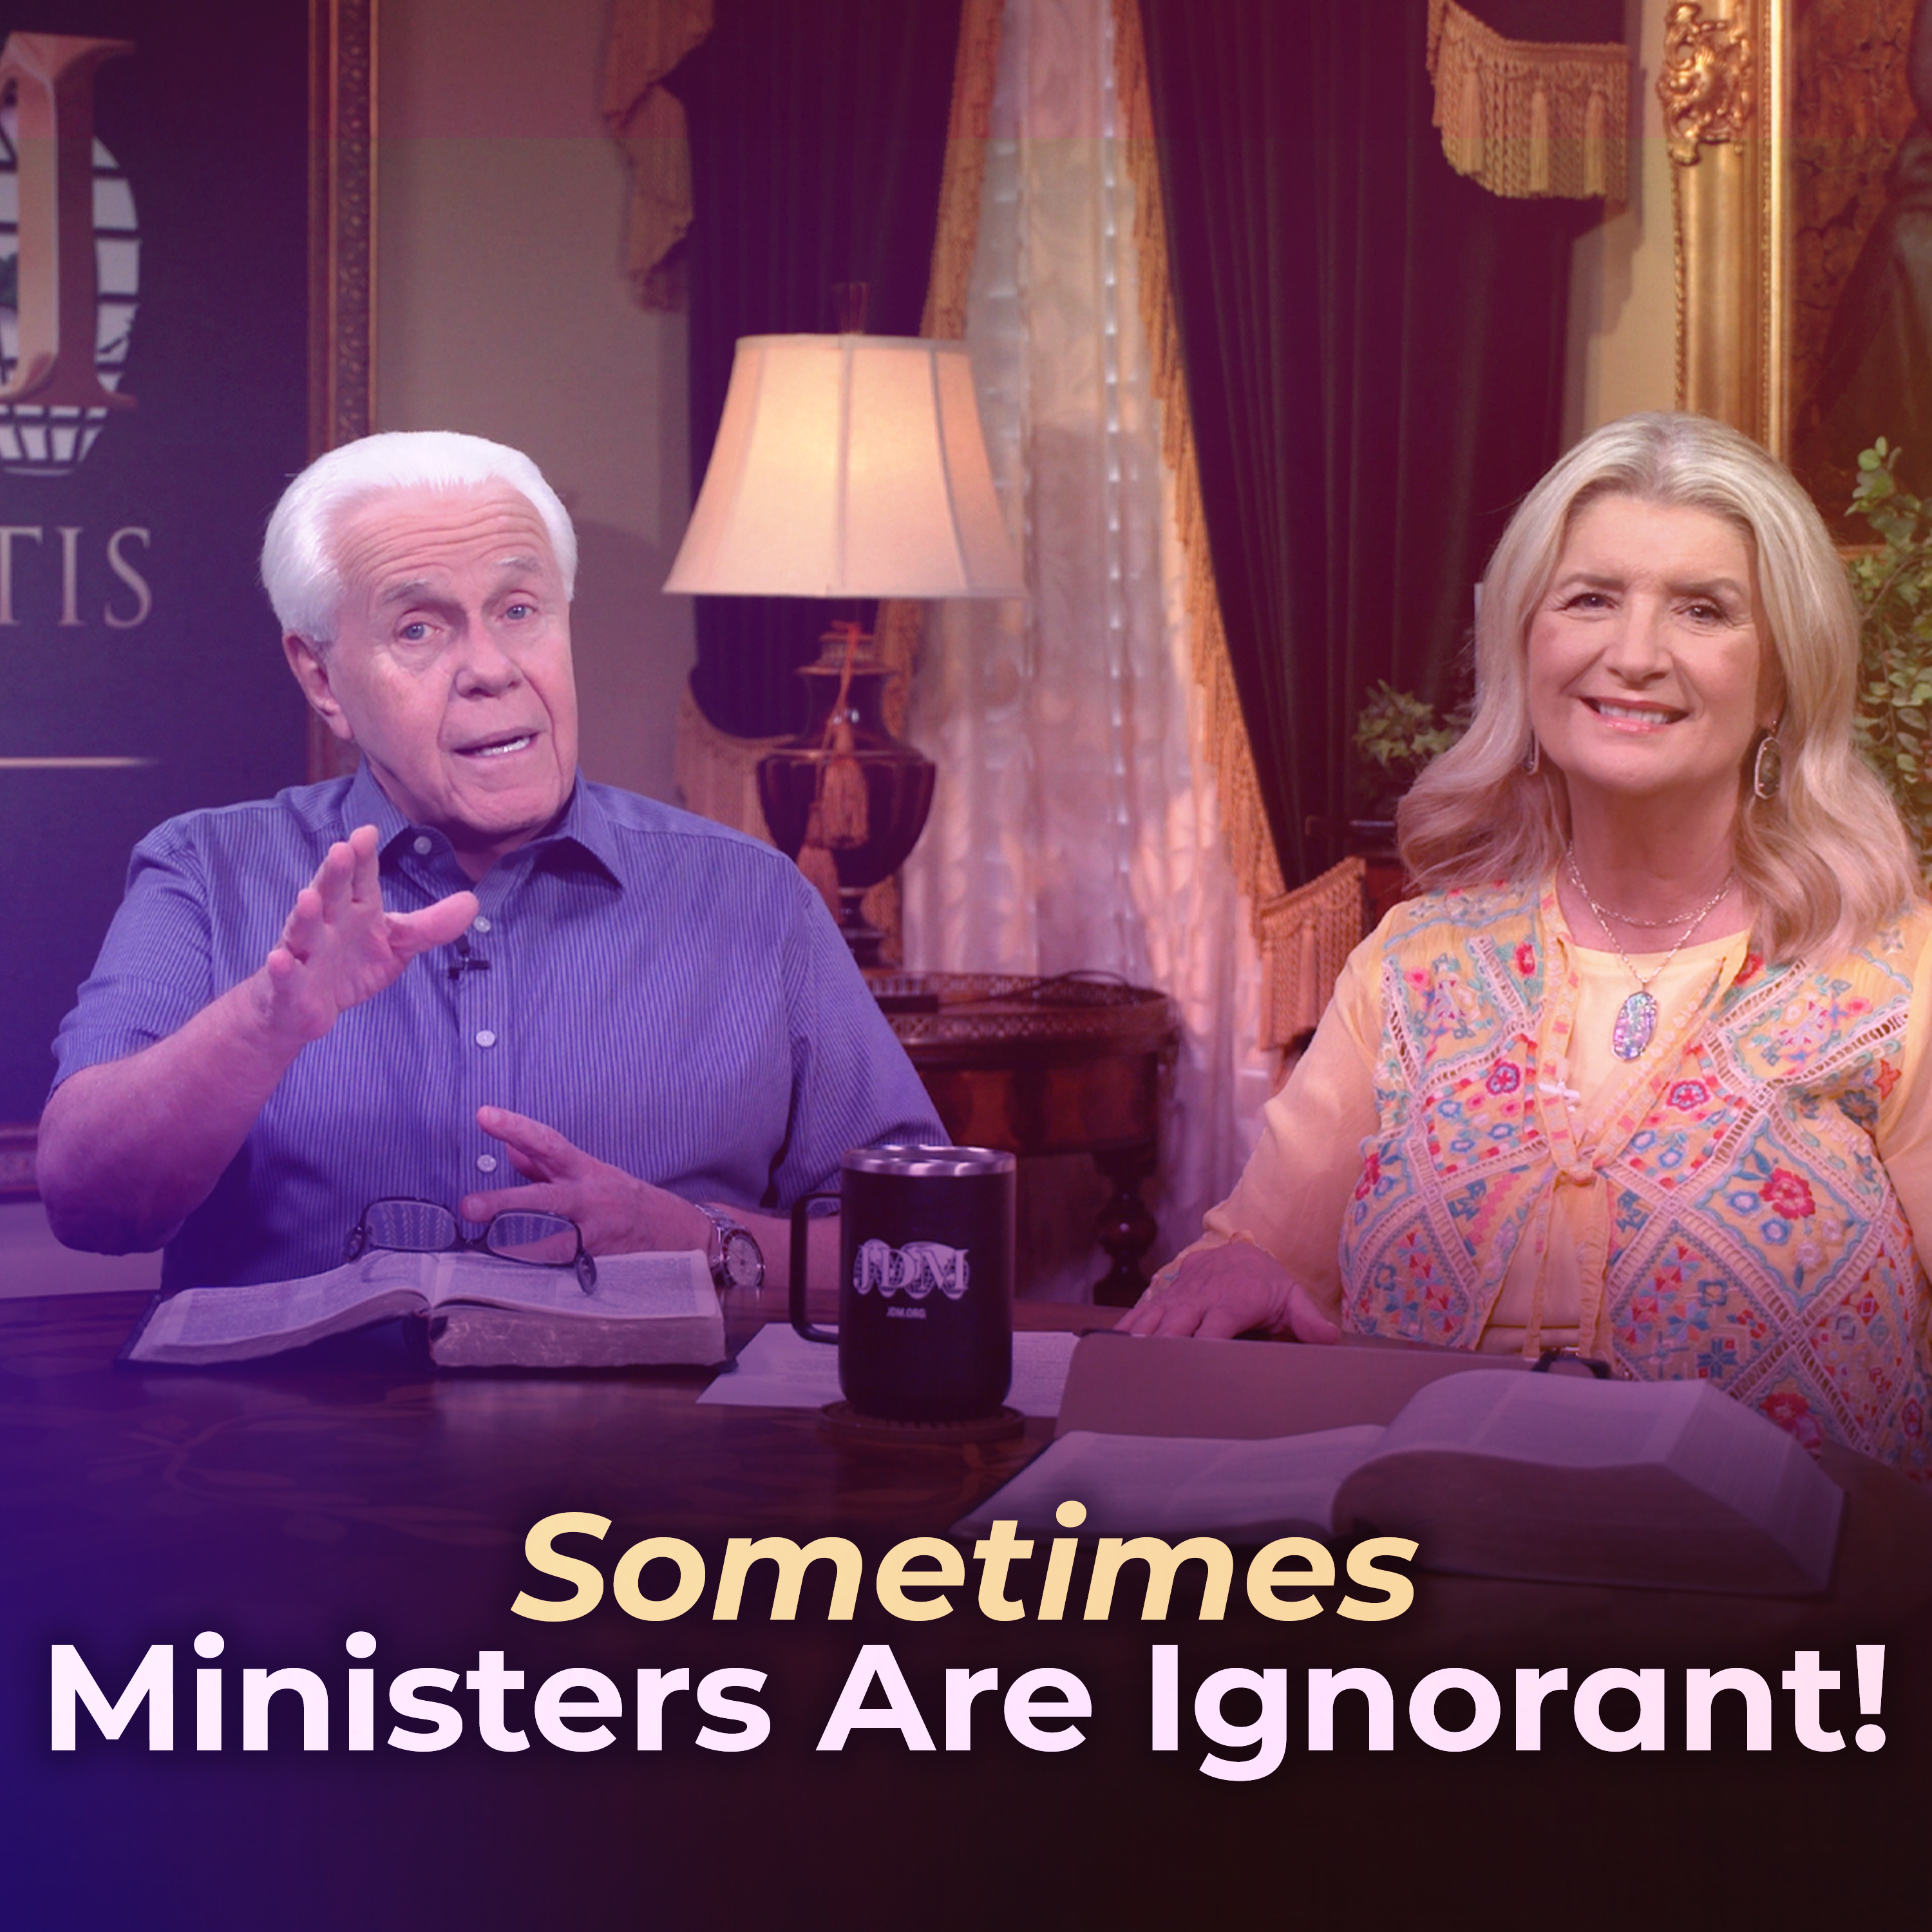  Sometimes Ministers are Ignorant